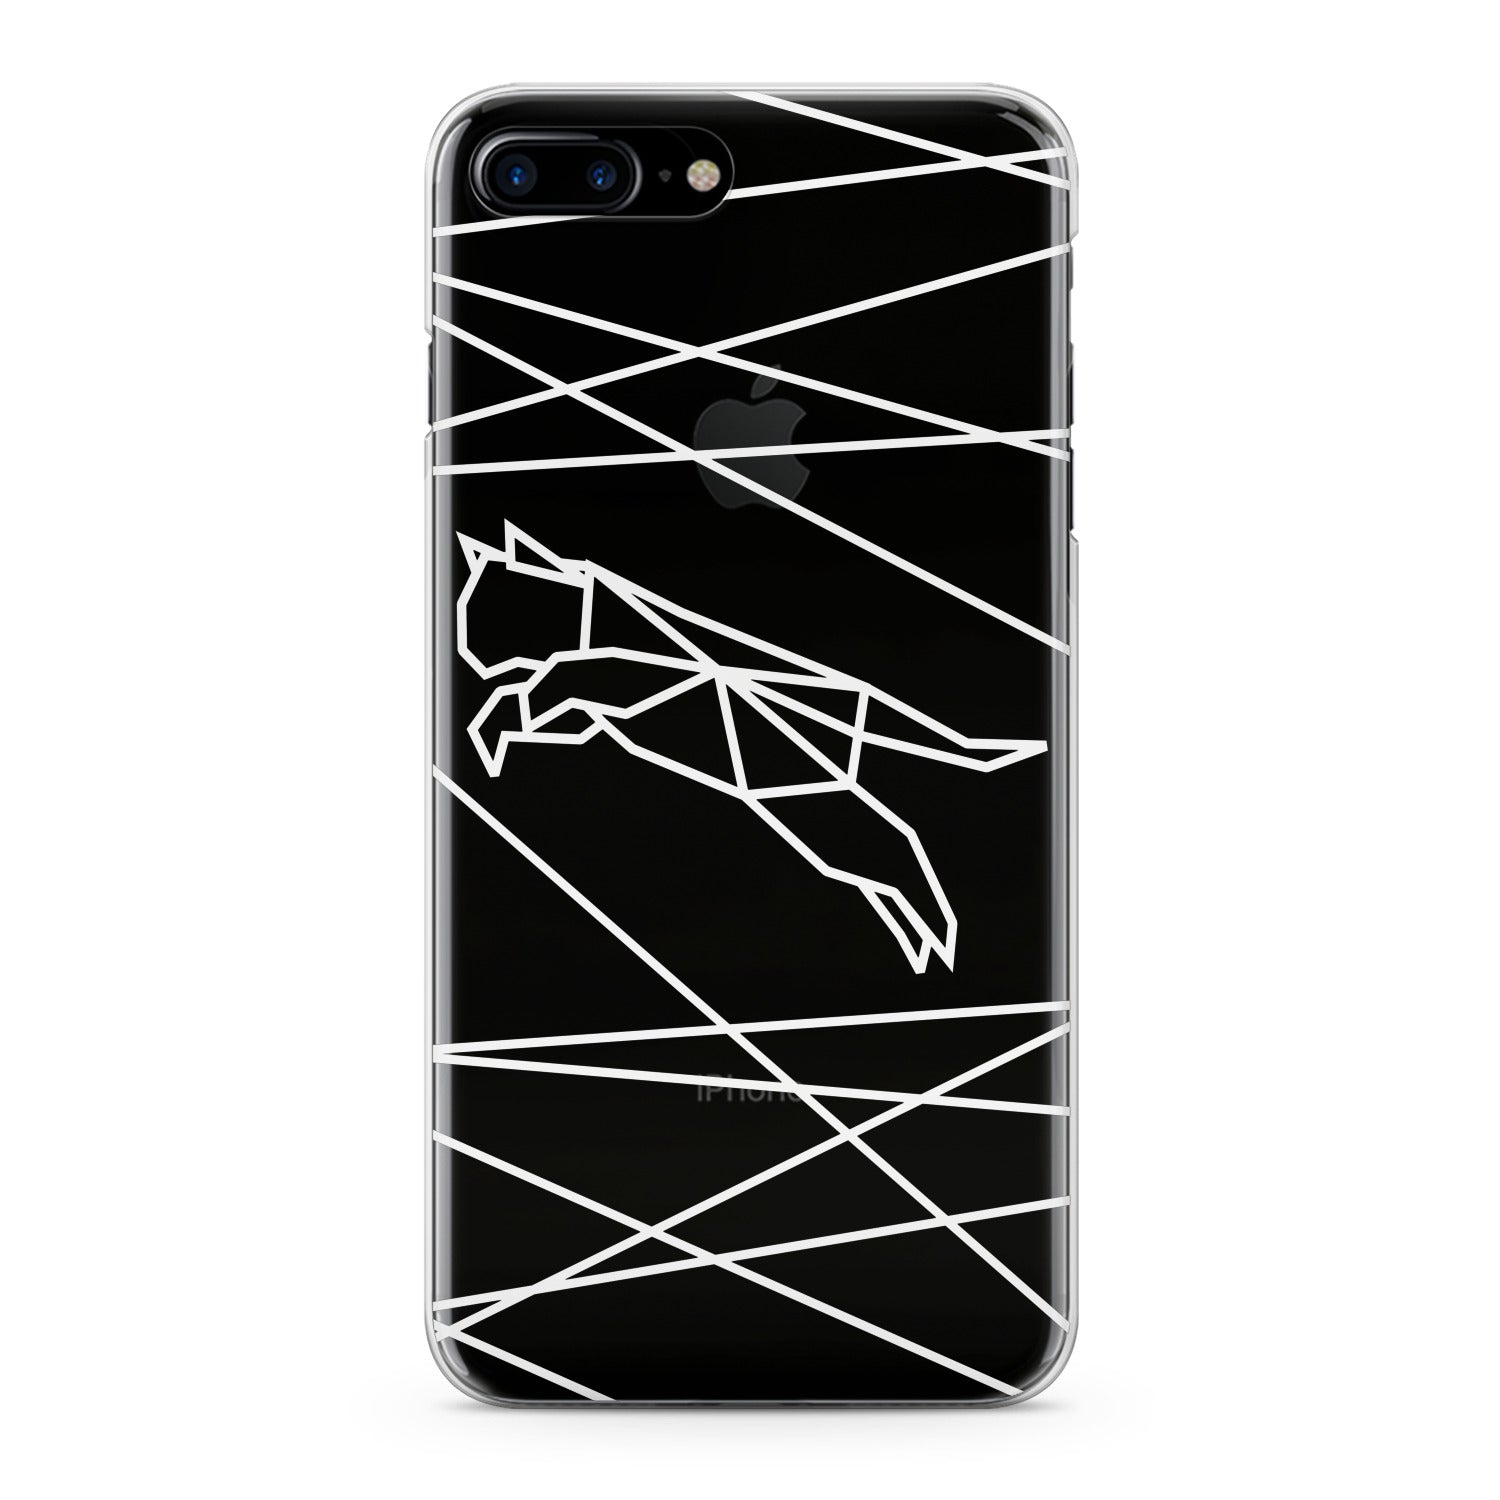 Lex Altern White Geometric Cat Phone Case for your iPhone & Android phone.